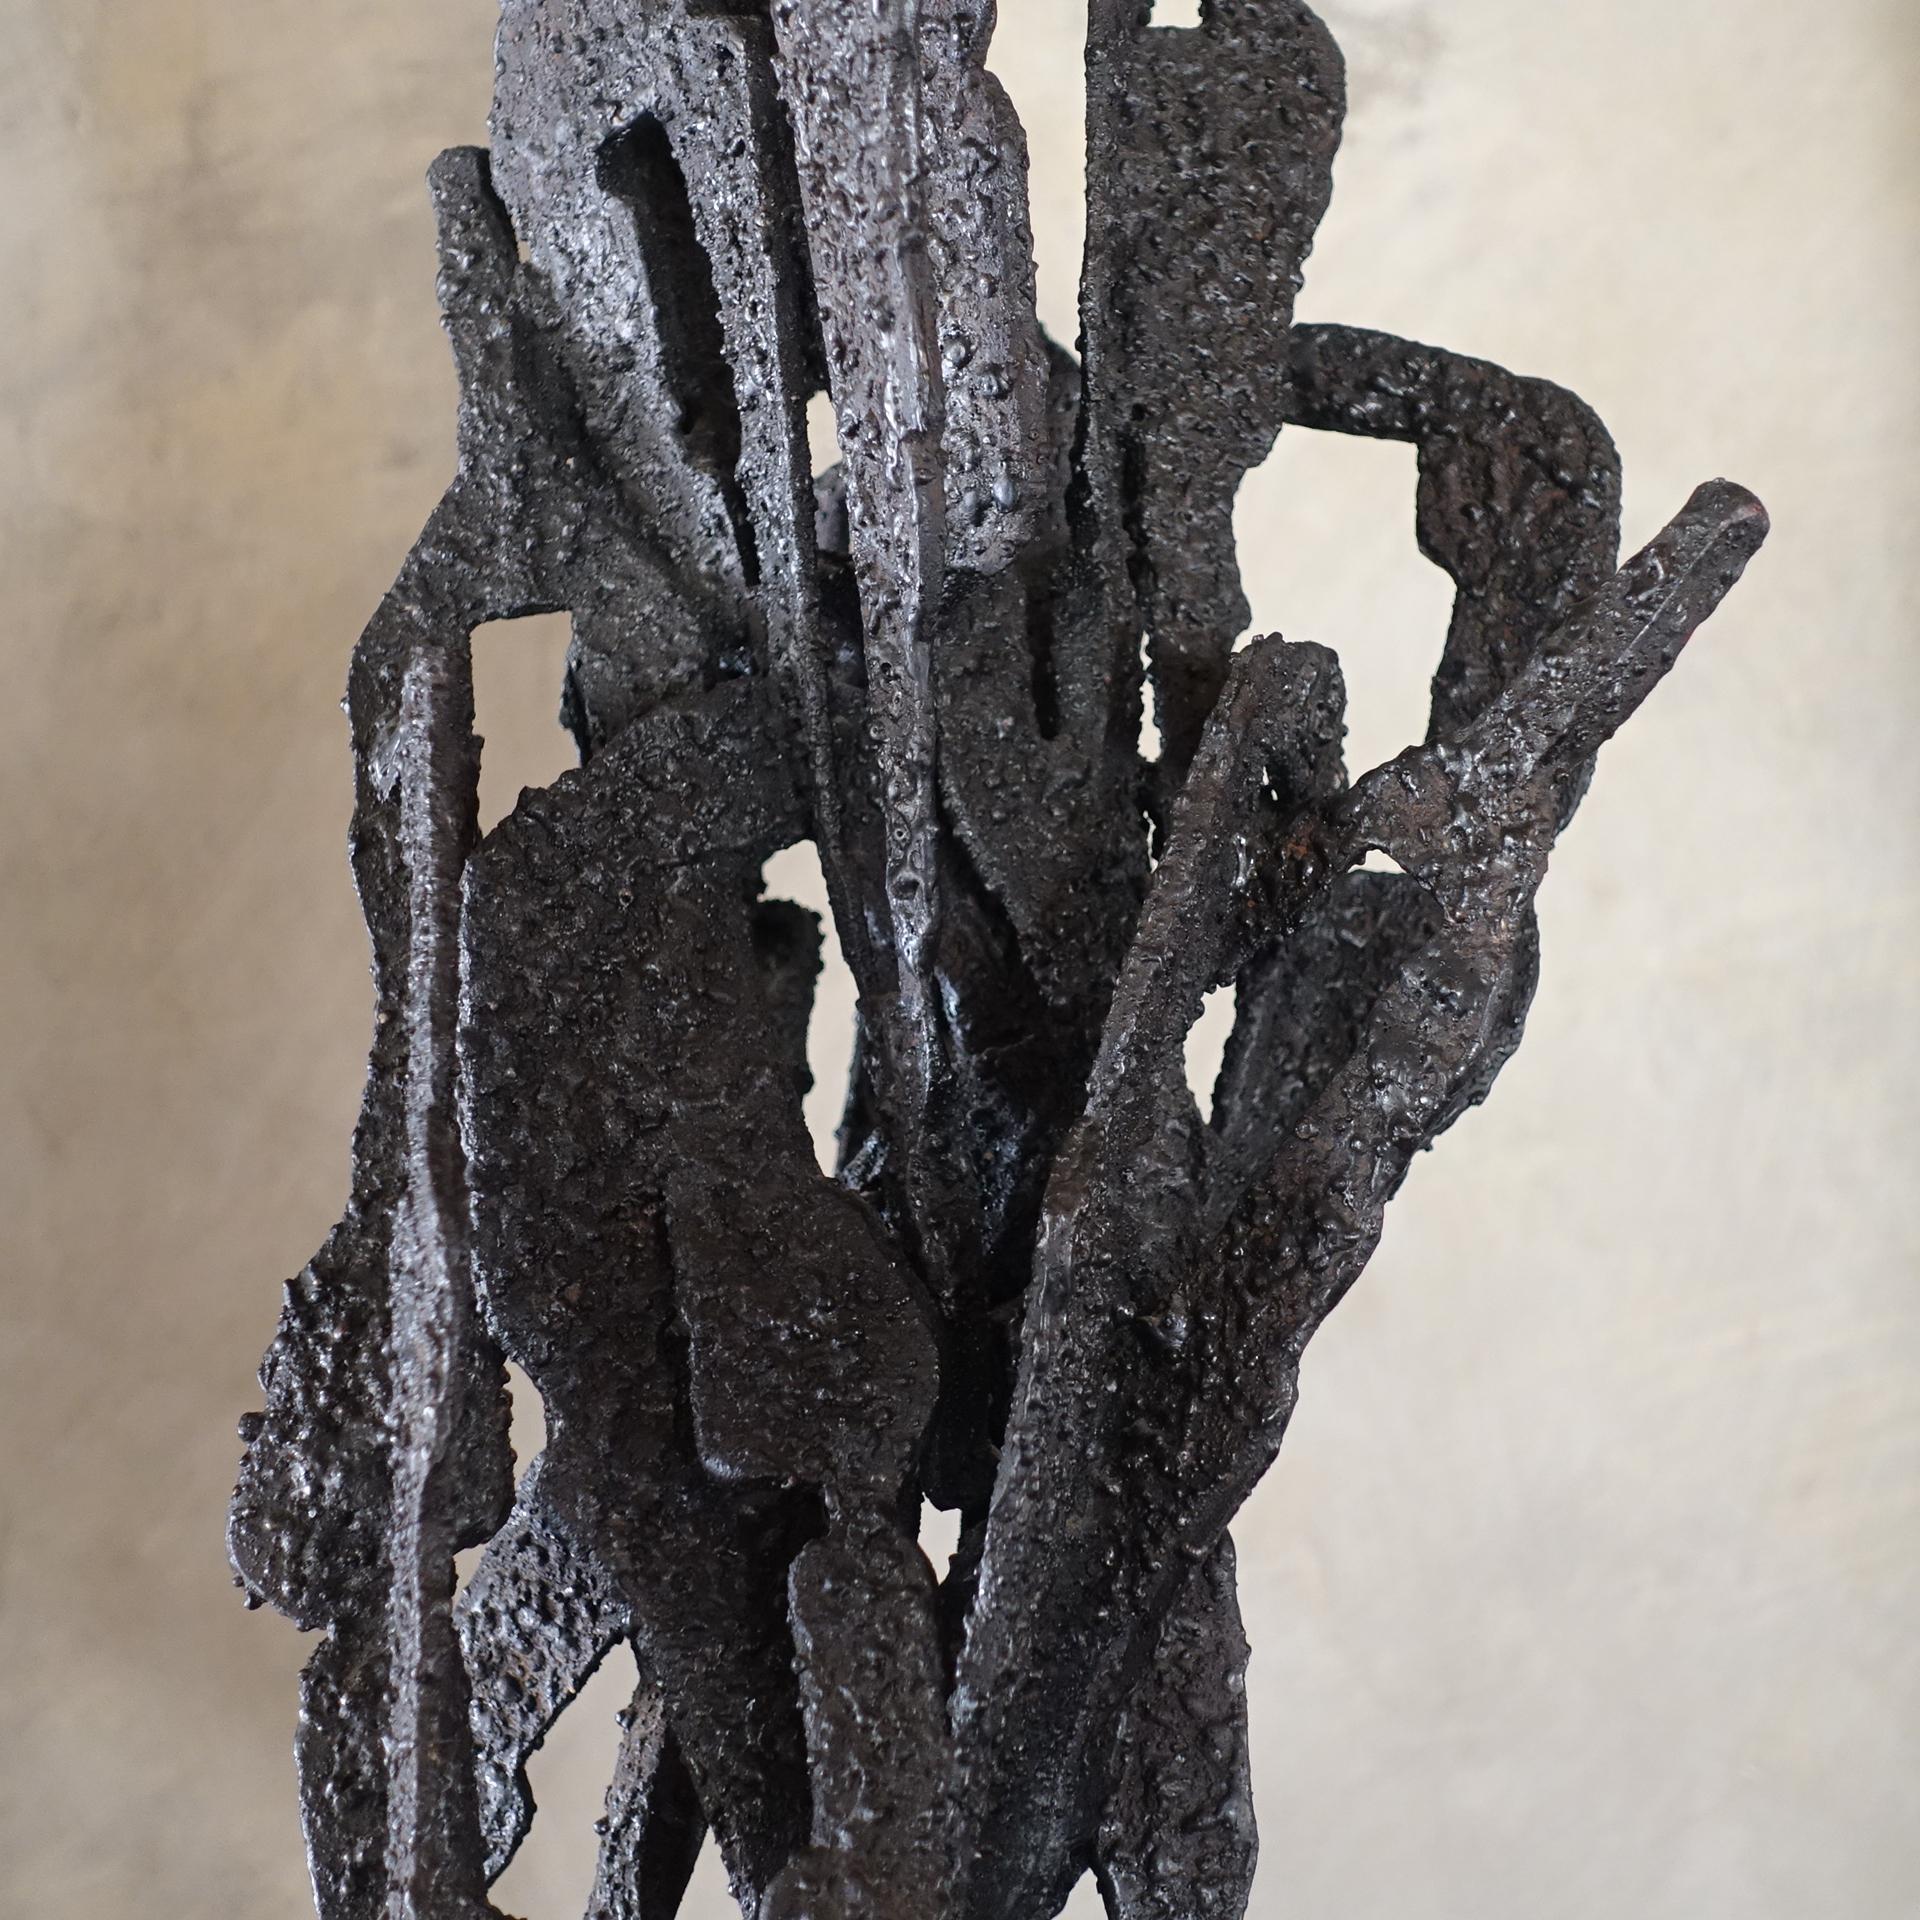 Raw steel abstract sculpture on wood base by Italian artist Antonio Murri, perfect condition and beautiful vintage patina, signed Murri, Italy, circa 1970s.